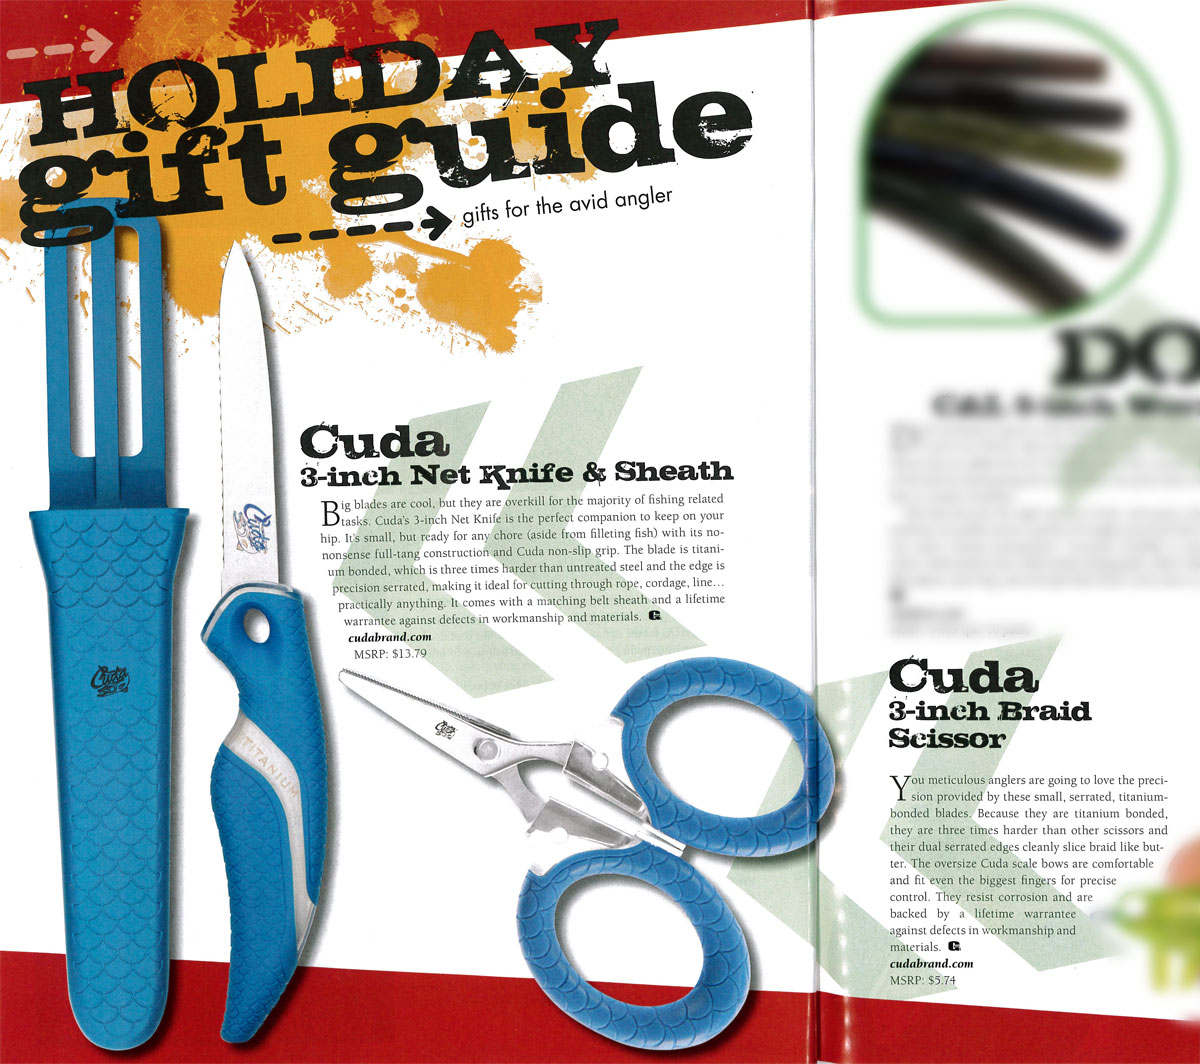 Featured in GAFF’s holiday gift guide - Dec, 2015